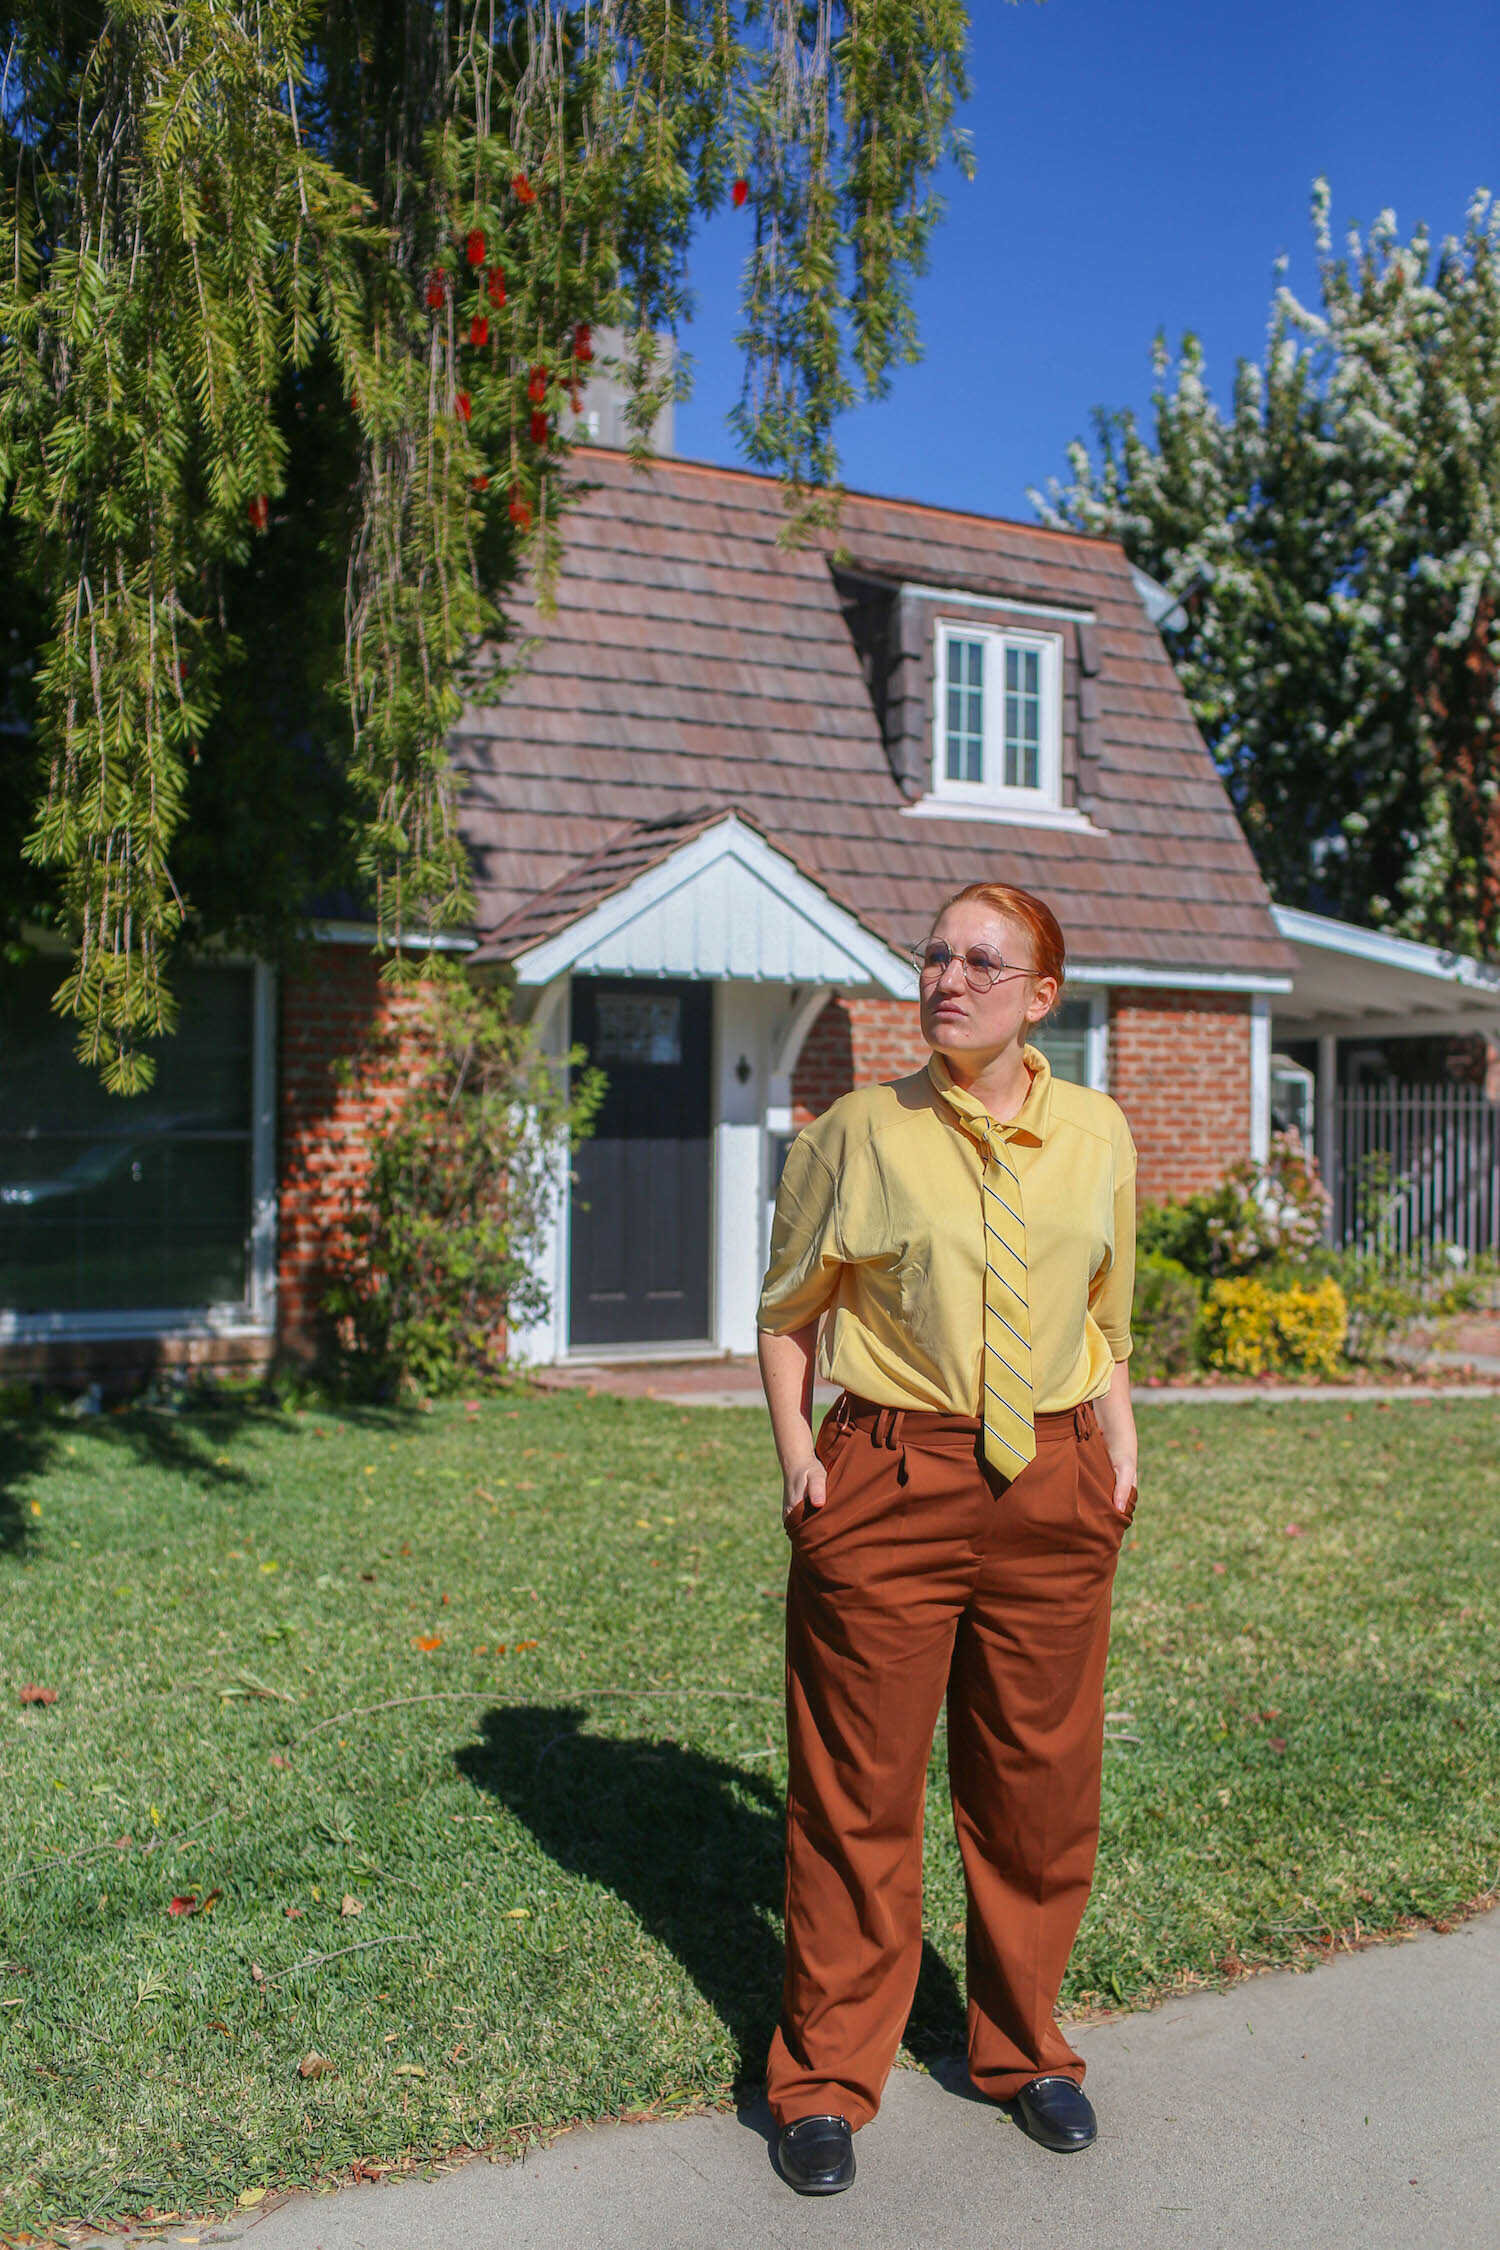 Kara wearing Dwight  costume standing in front of Jim and Pam's house in Van Nuys.